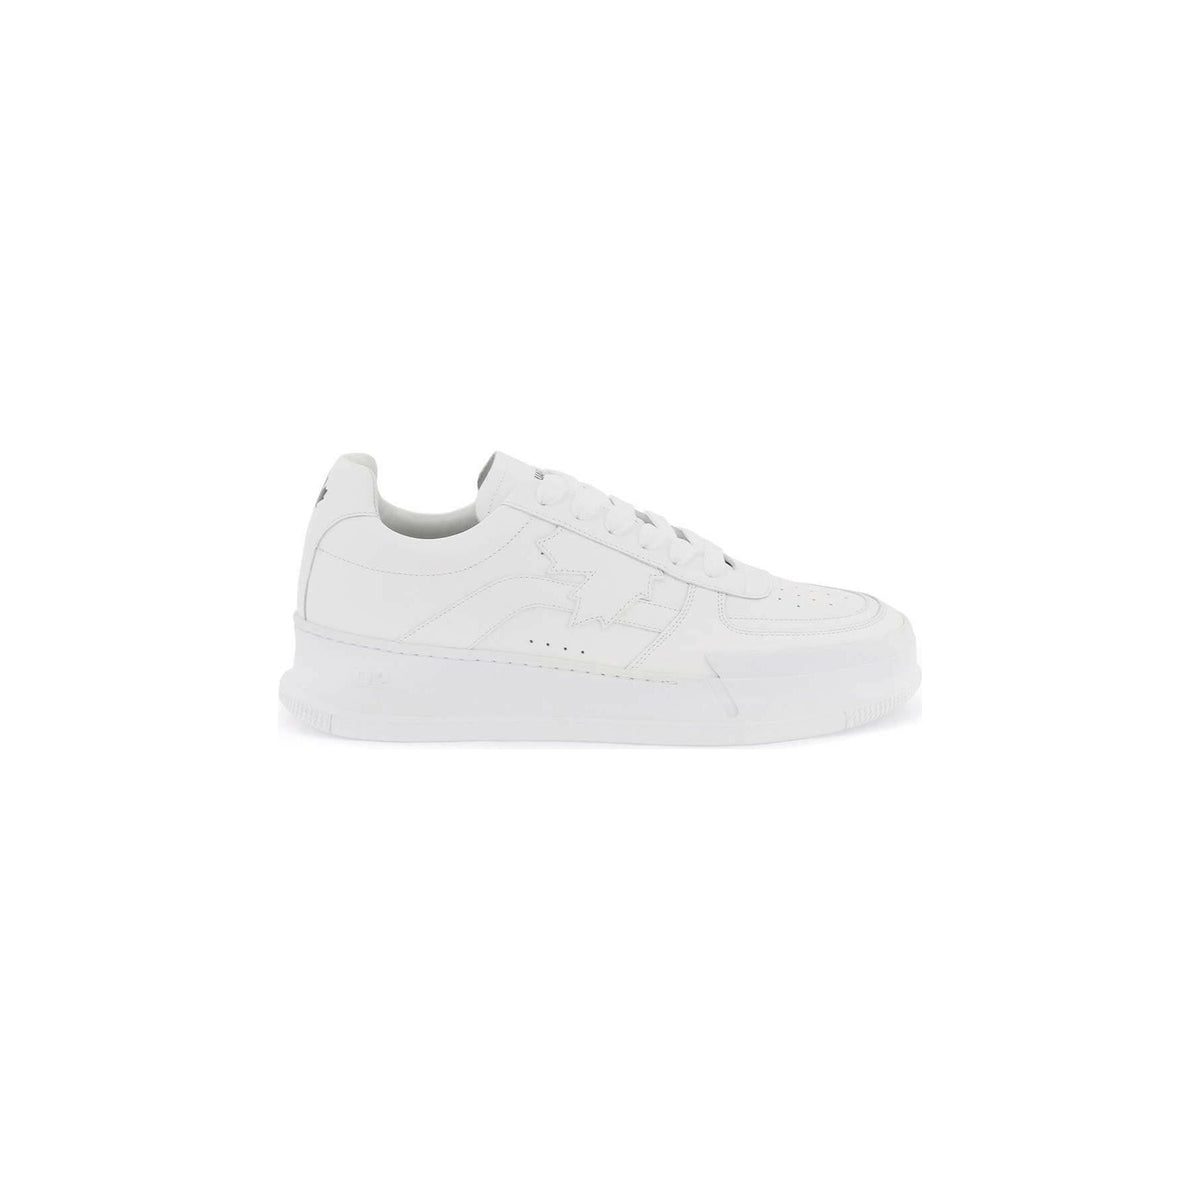 White Leather Canadian Sneakers With Canadian Leaf Detail DSQUARED2 JOHN JULIA.